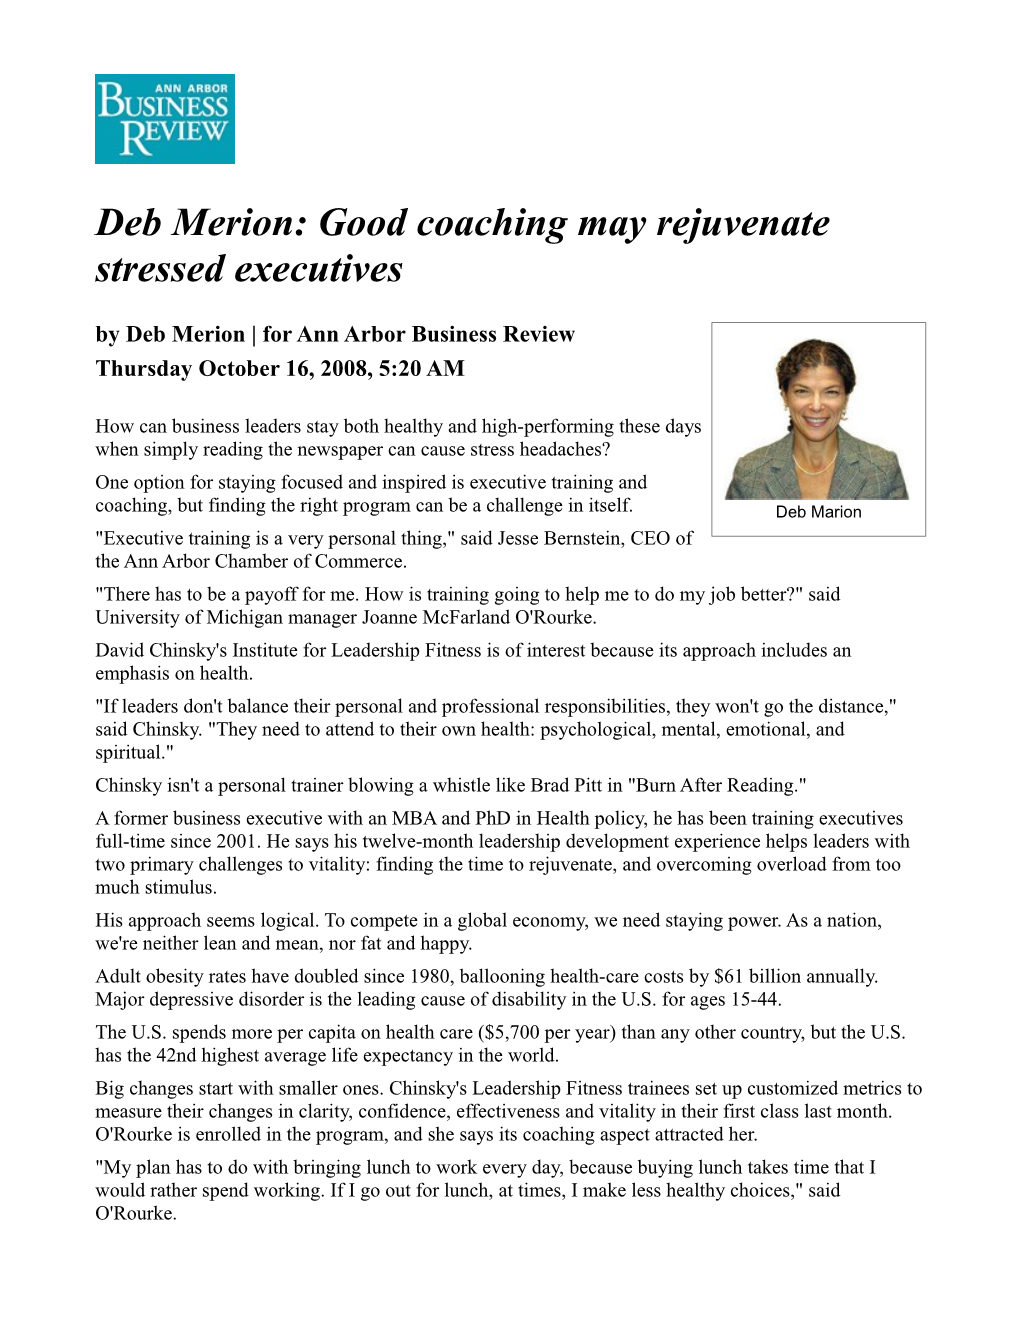 Good Coaching May Rejuvenate Stressed Executives by Deb Merion | for Ann Arbor Business Review Thursday October 16, 2008, 5:20 AM